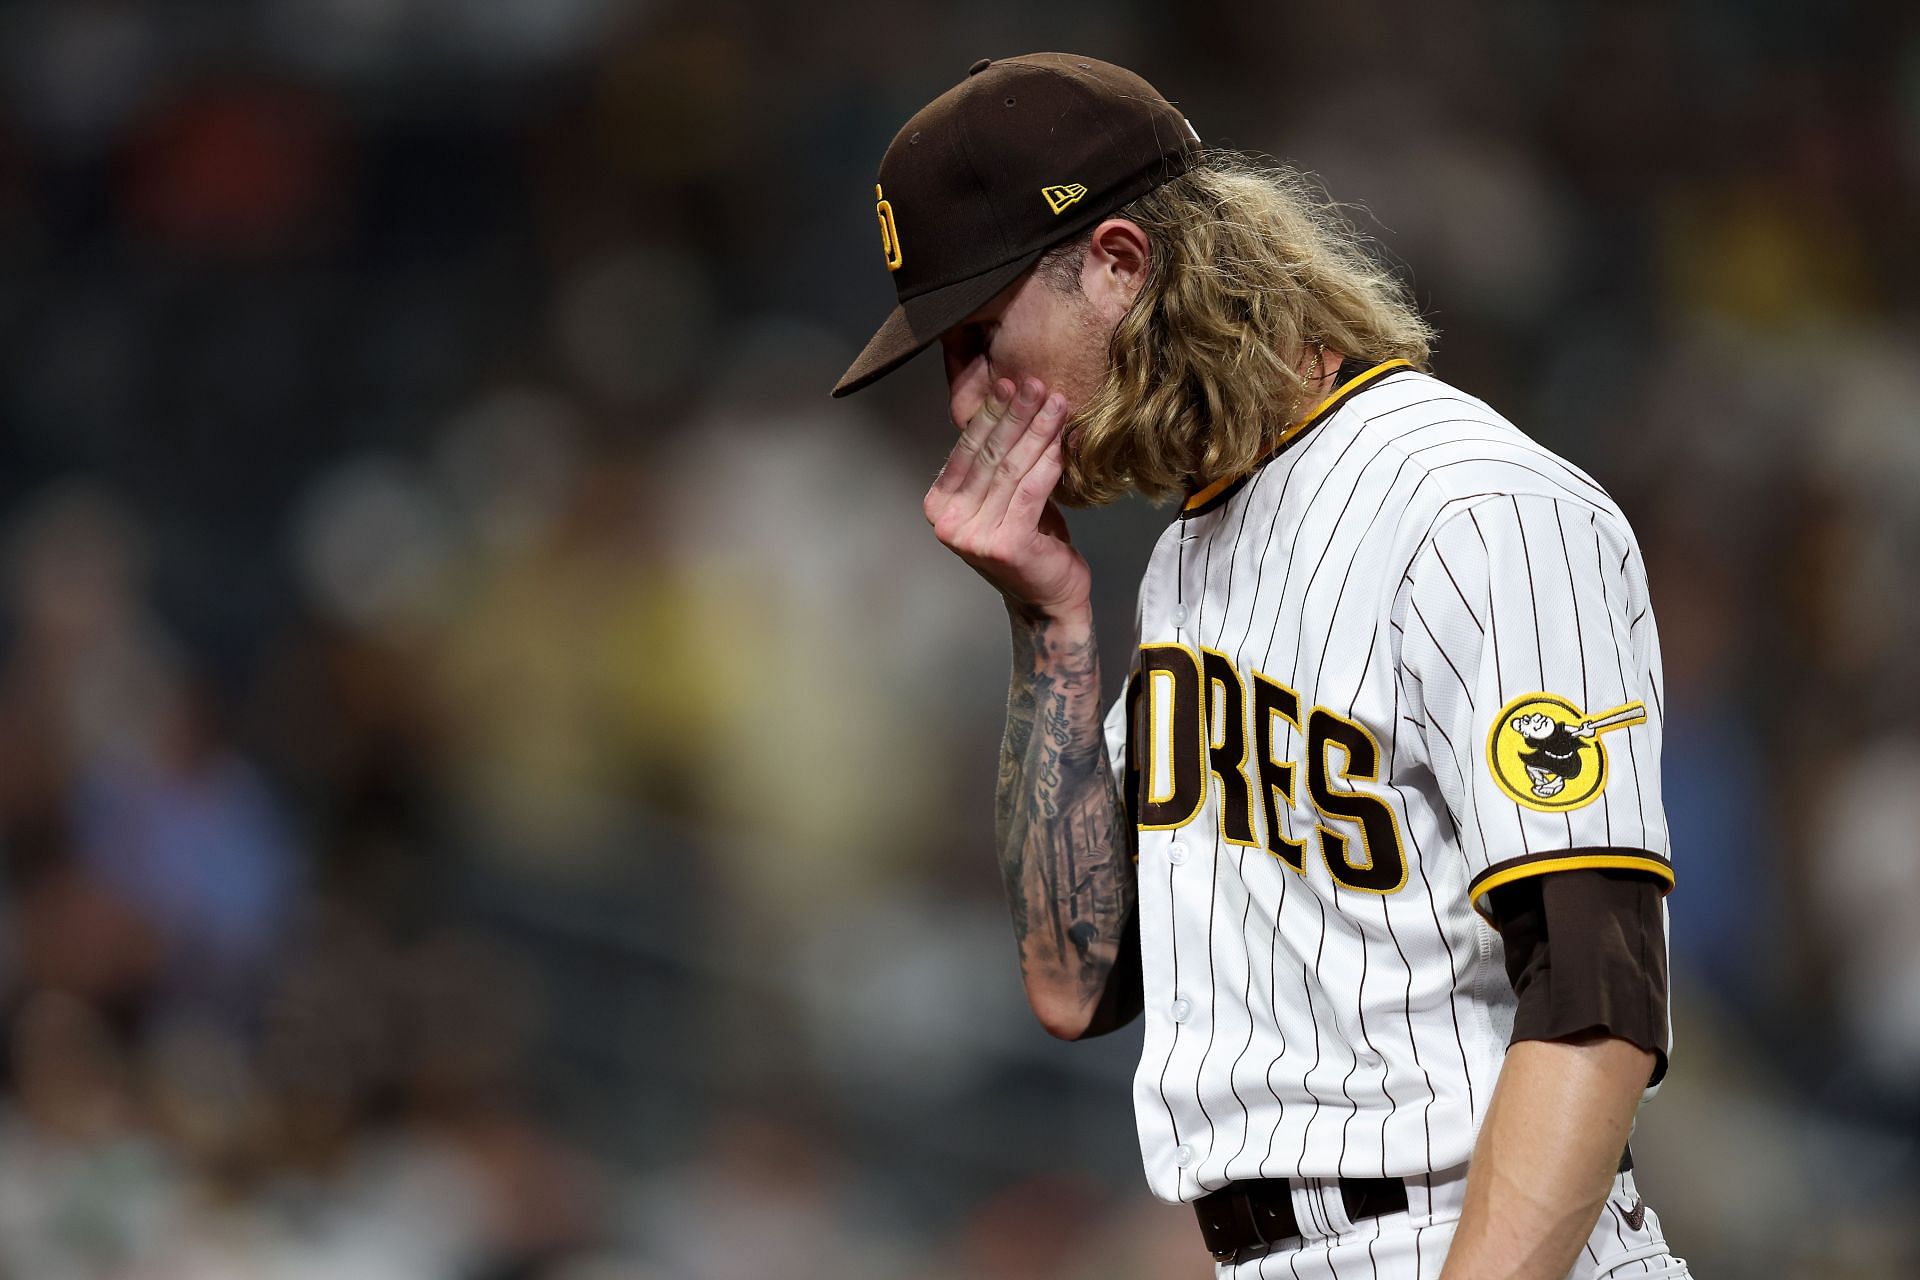 Josh Hader has Been a Nuclear Disaster for the Padres